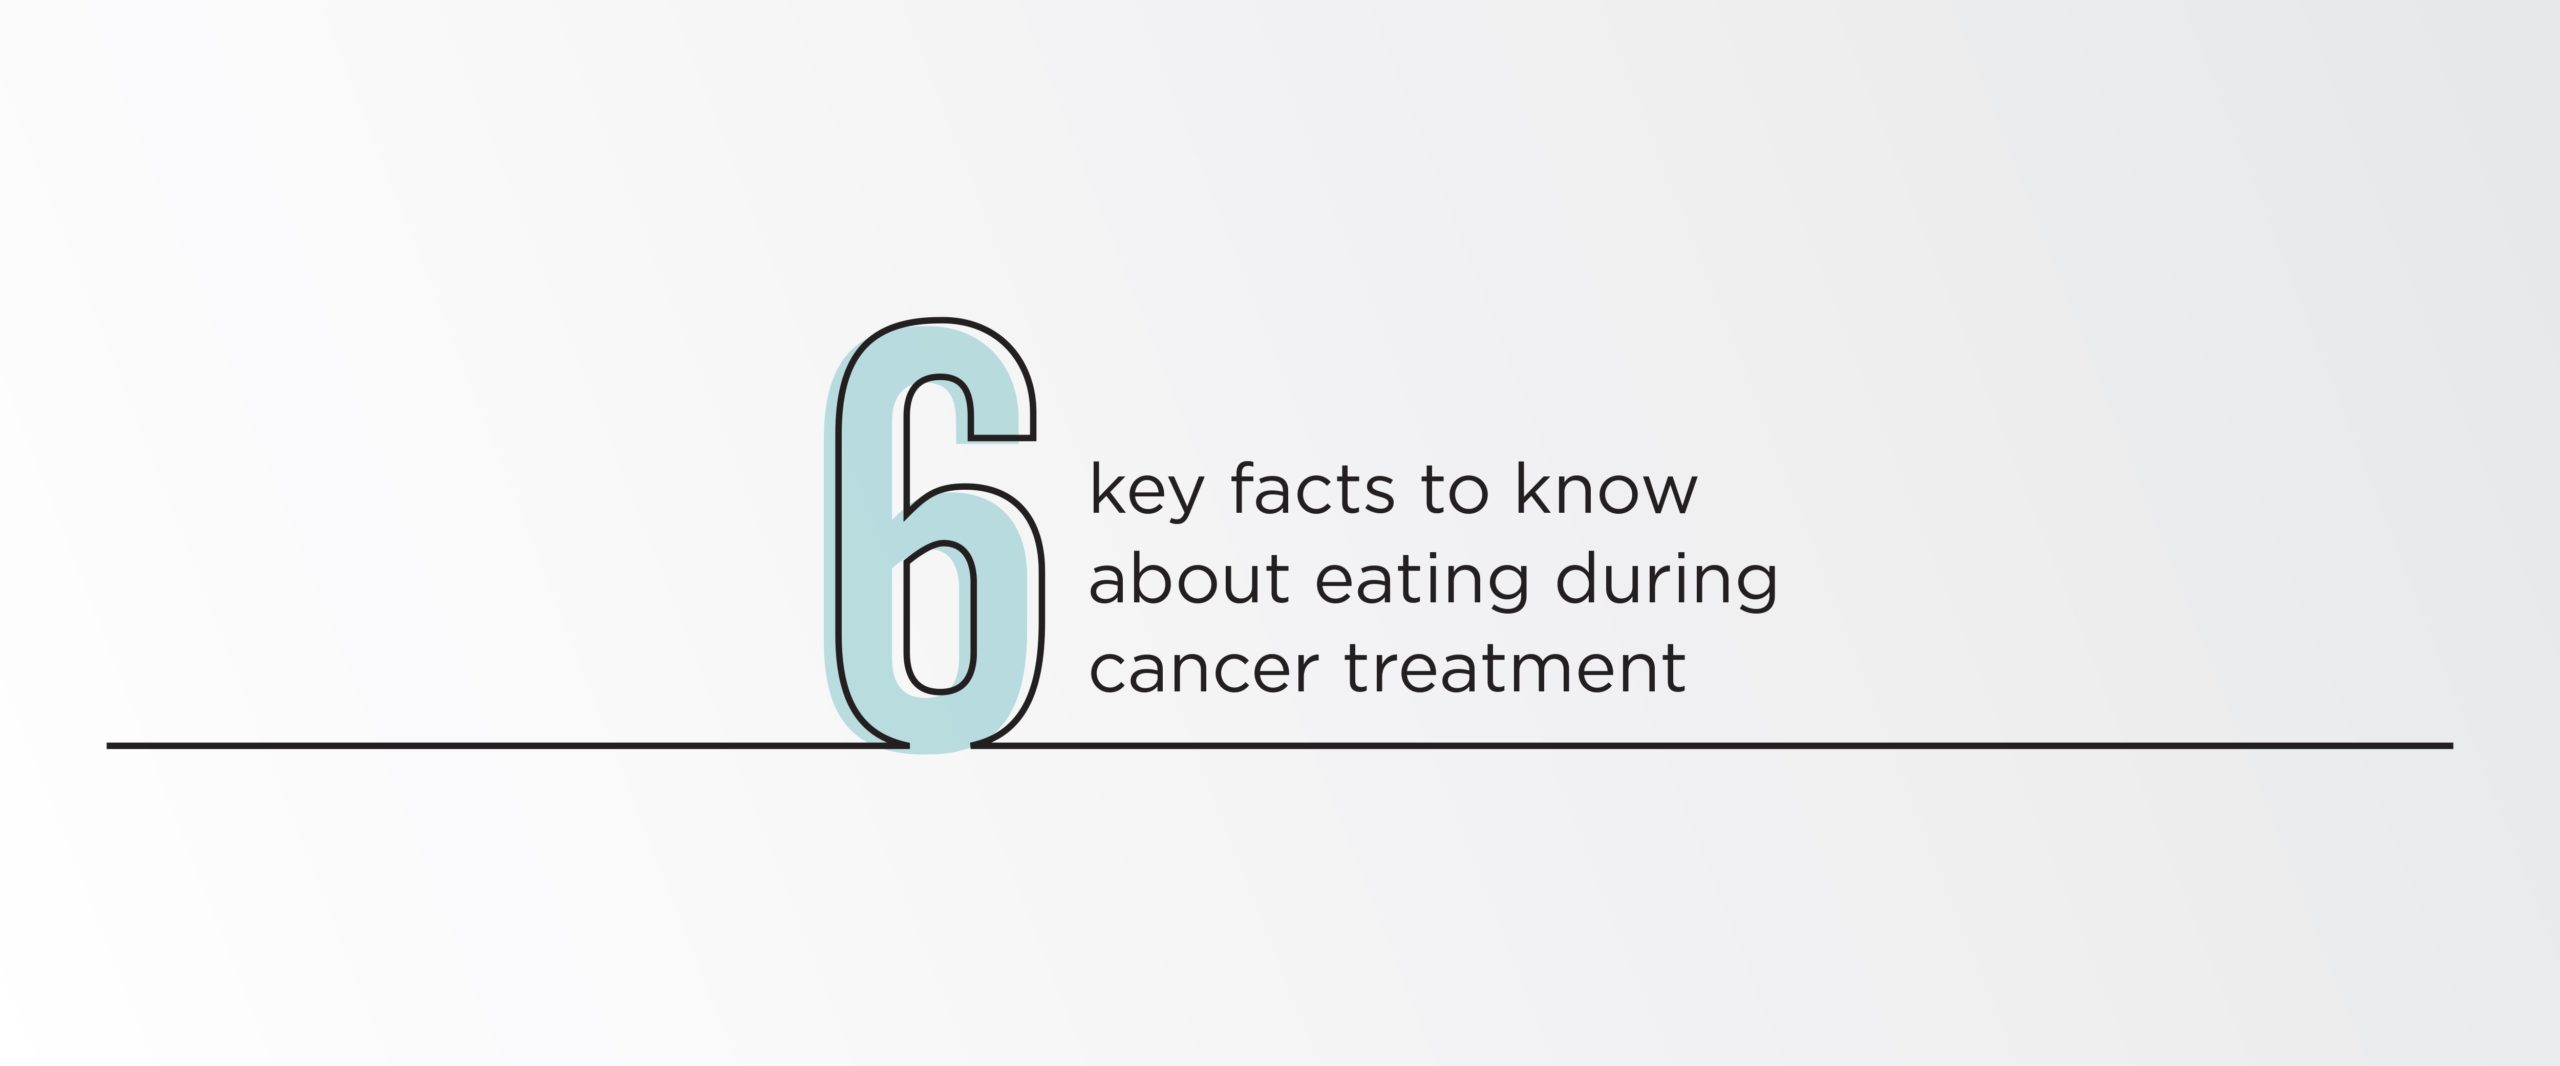 6 key facts to know about eating during cancer treatment, blog